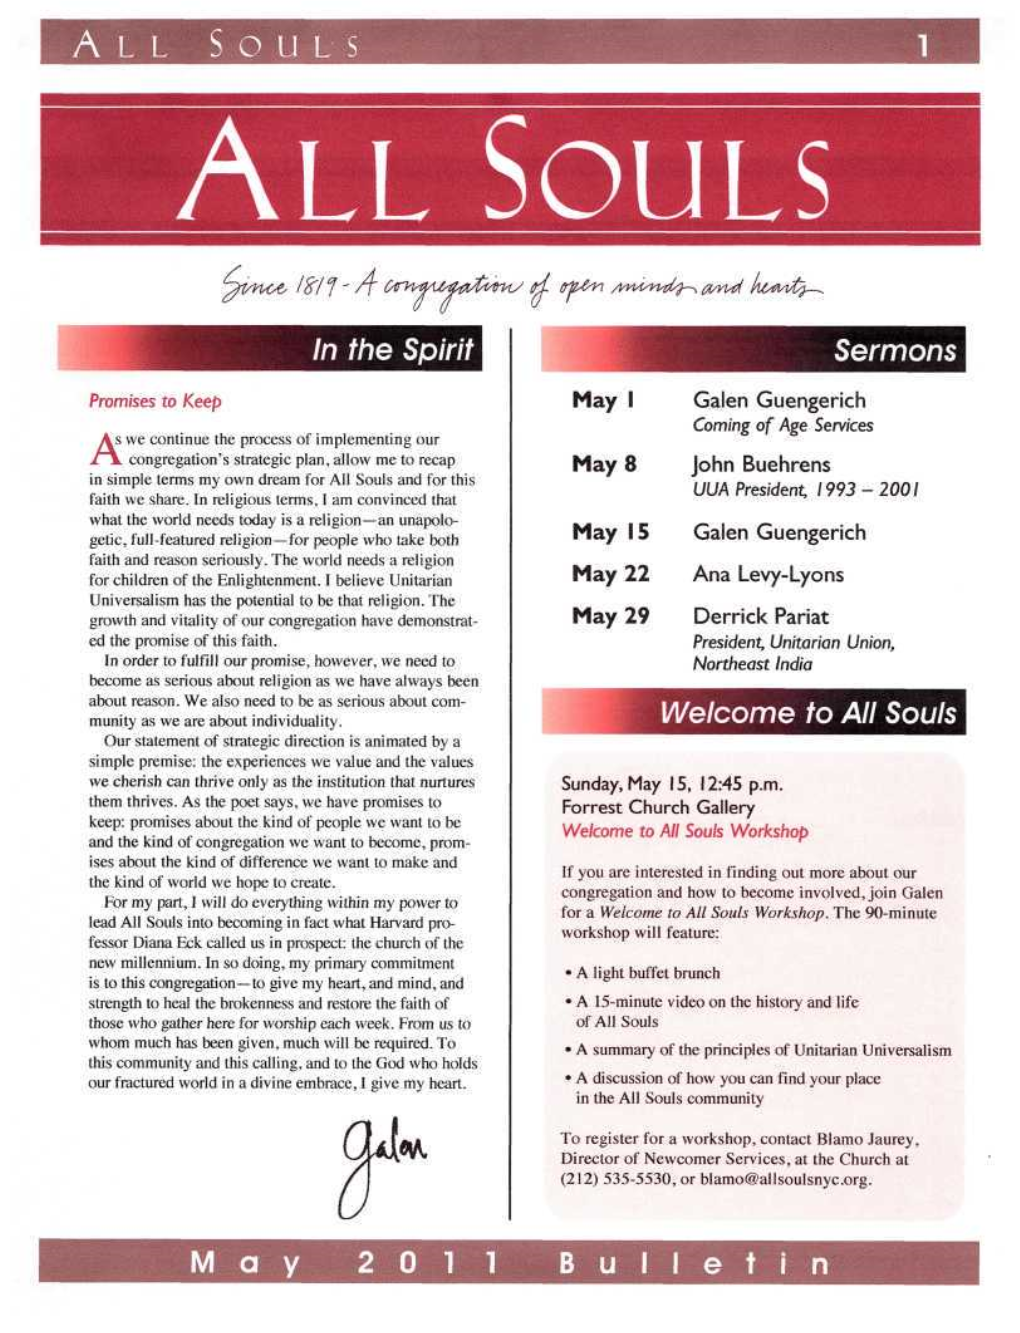 SOULS in the Spirit Sermons Welcome to All Souls M Ay 2 0 1 1 B Ulletin